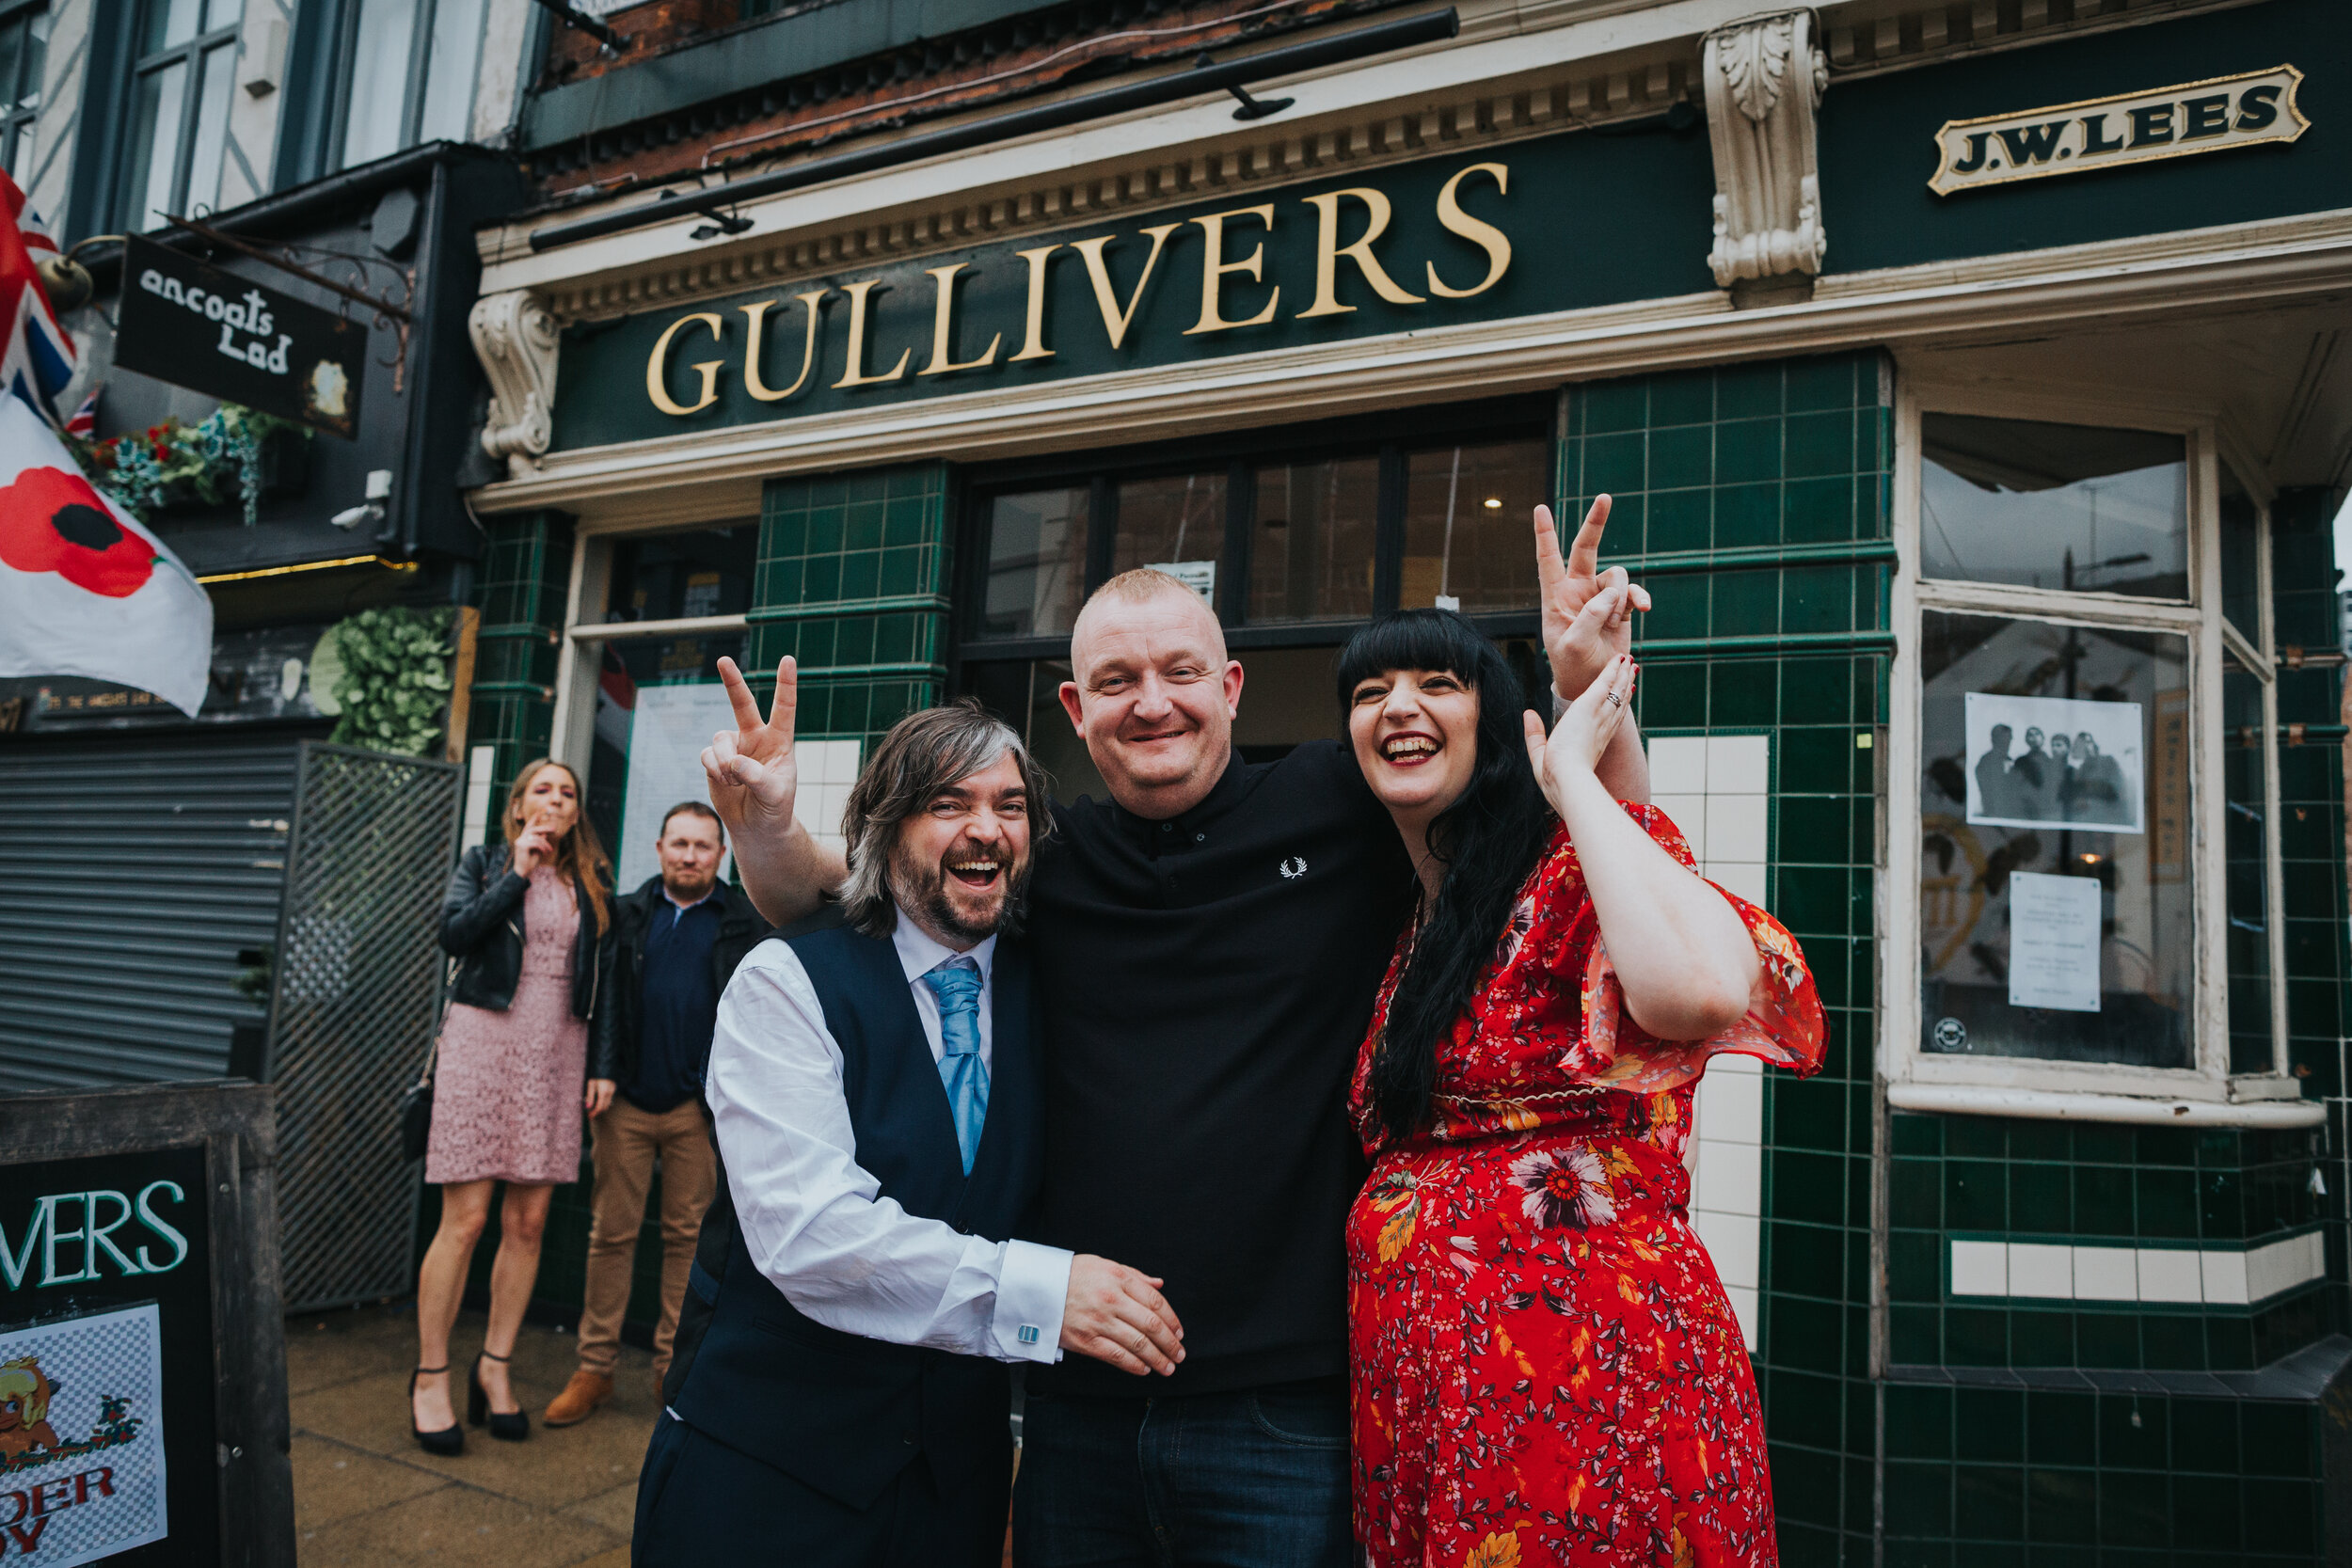 Bride and Groom pose with wedding guest outside pub in Manchester.  (Copy)